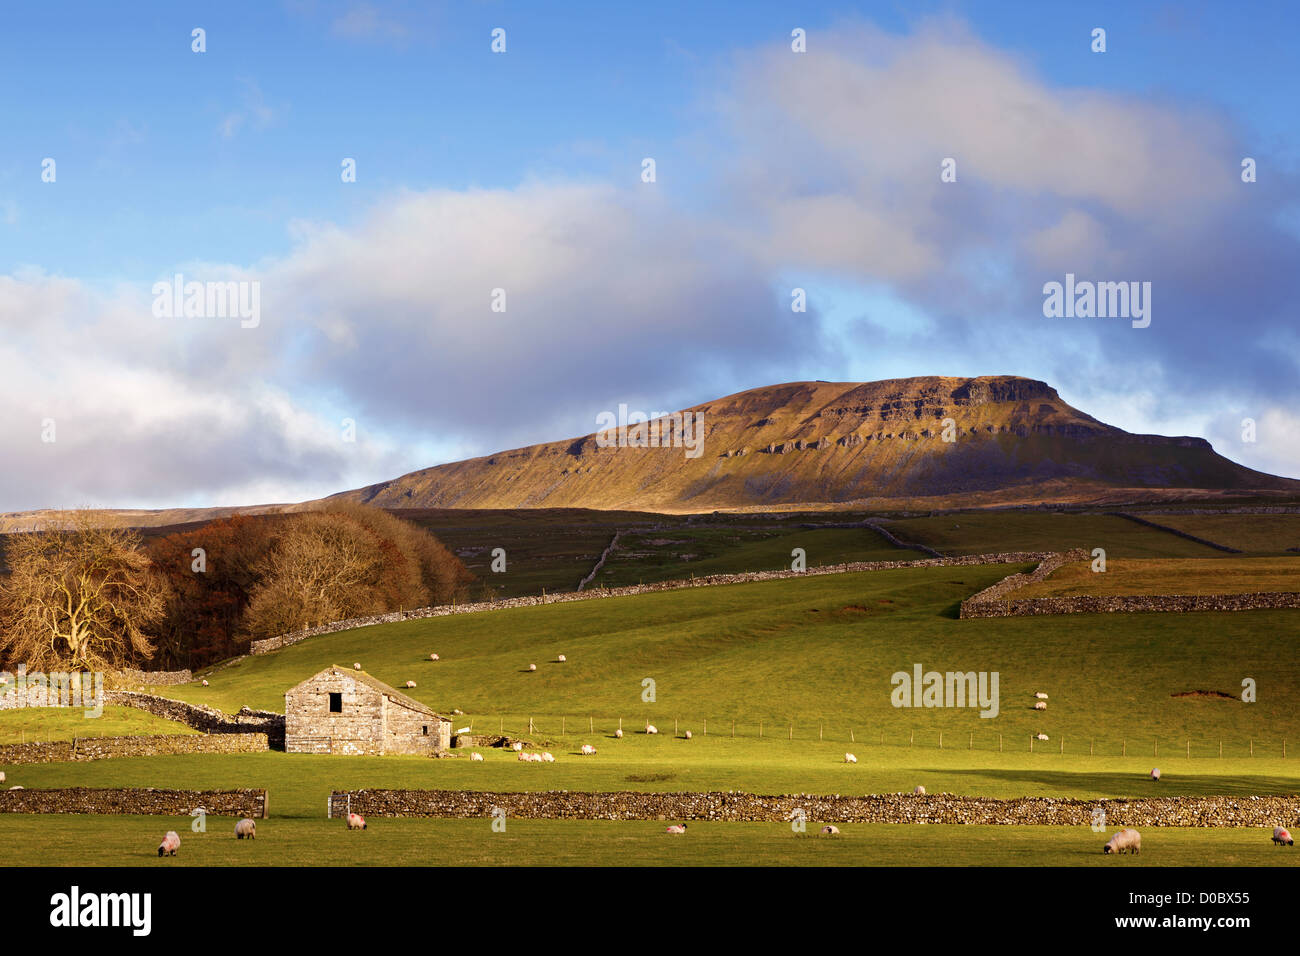 An old stone built barn in Horton-in-Ribblesdale, Yorkshire Dales, England Stock Photo